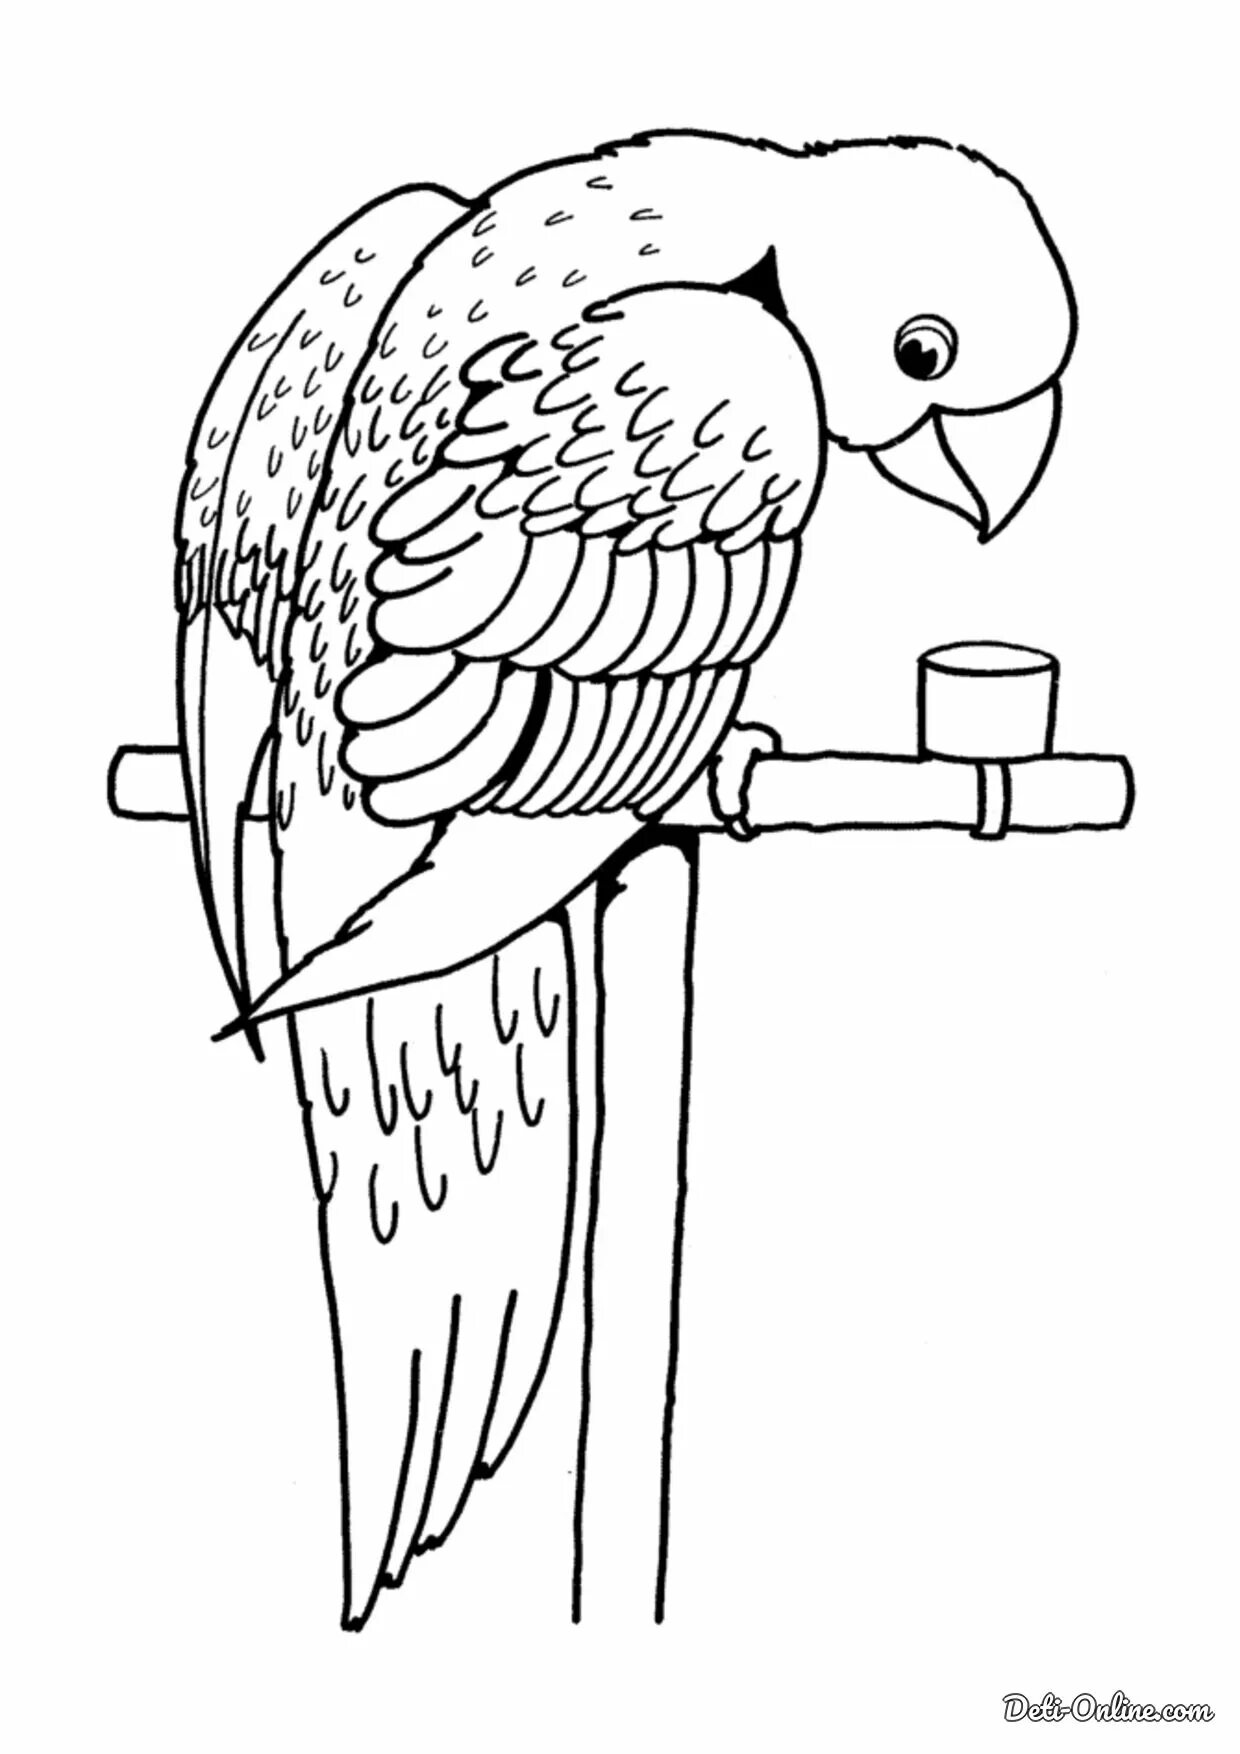 Color-laden totyқұs coloring page